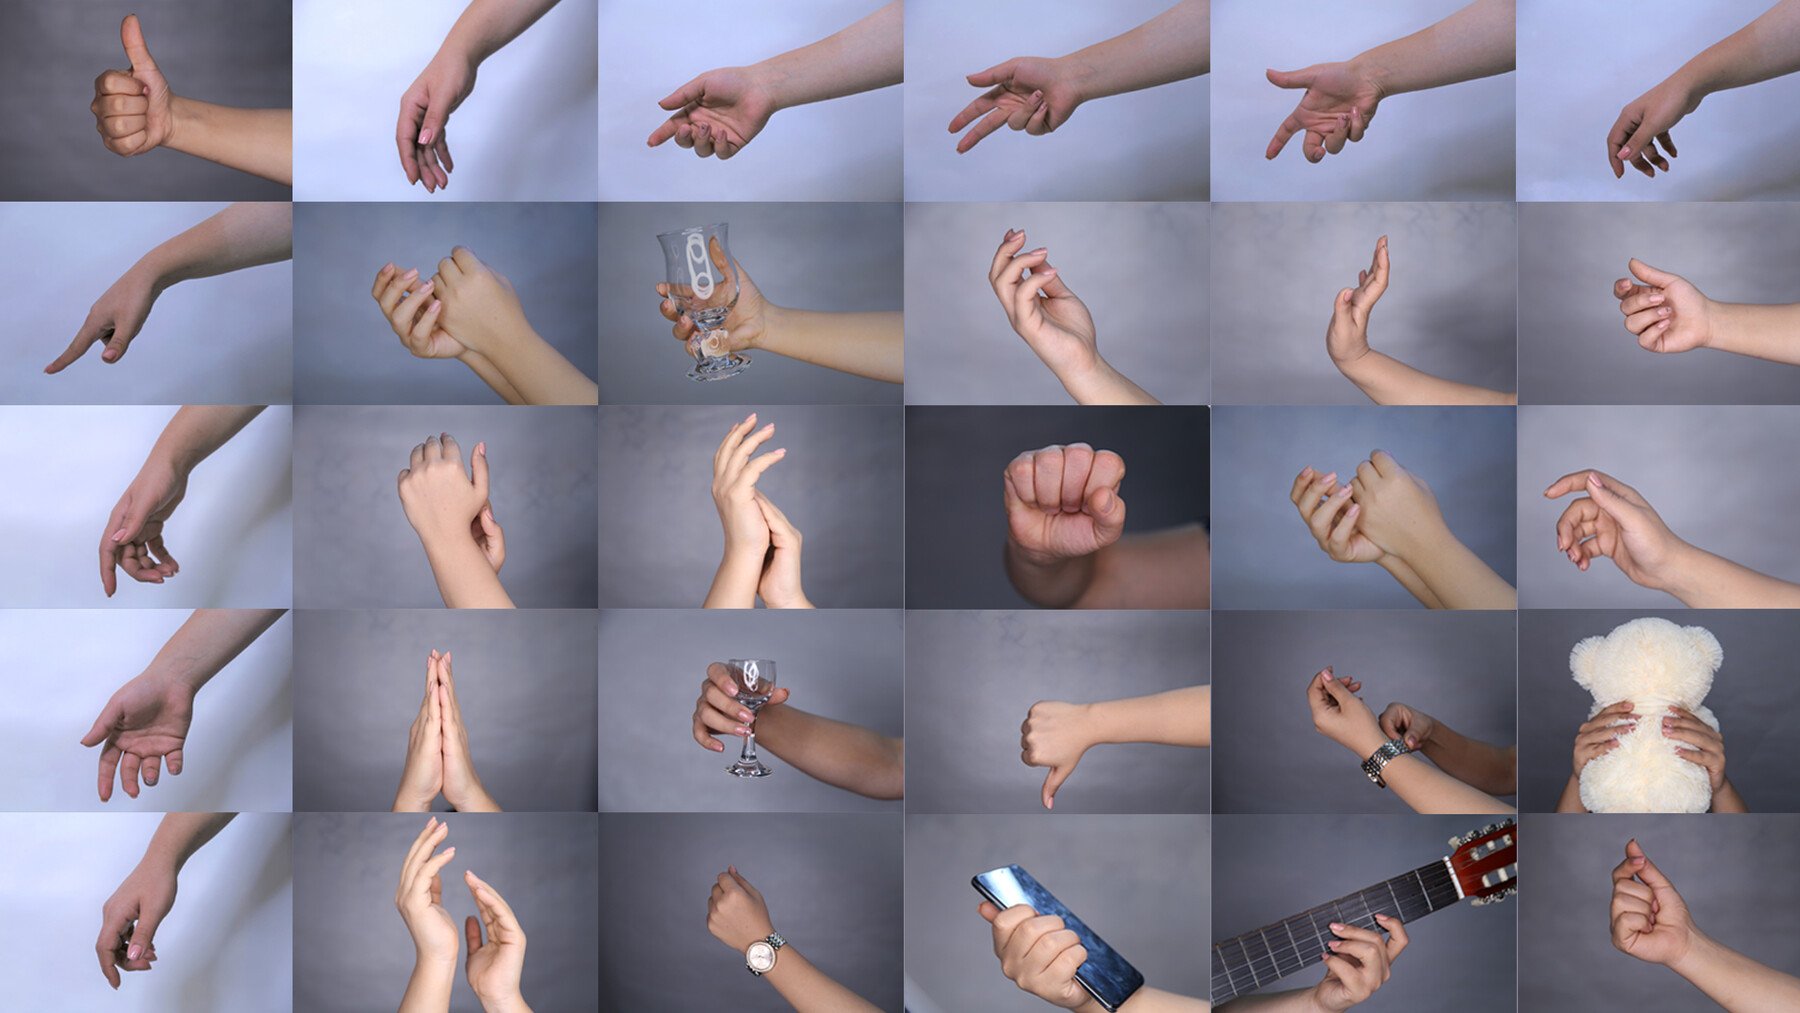 Hand and sitting poses for photography | Adobe